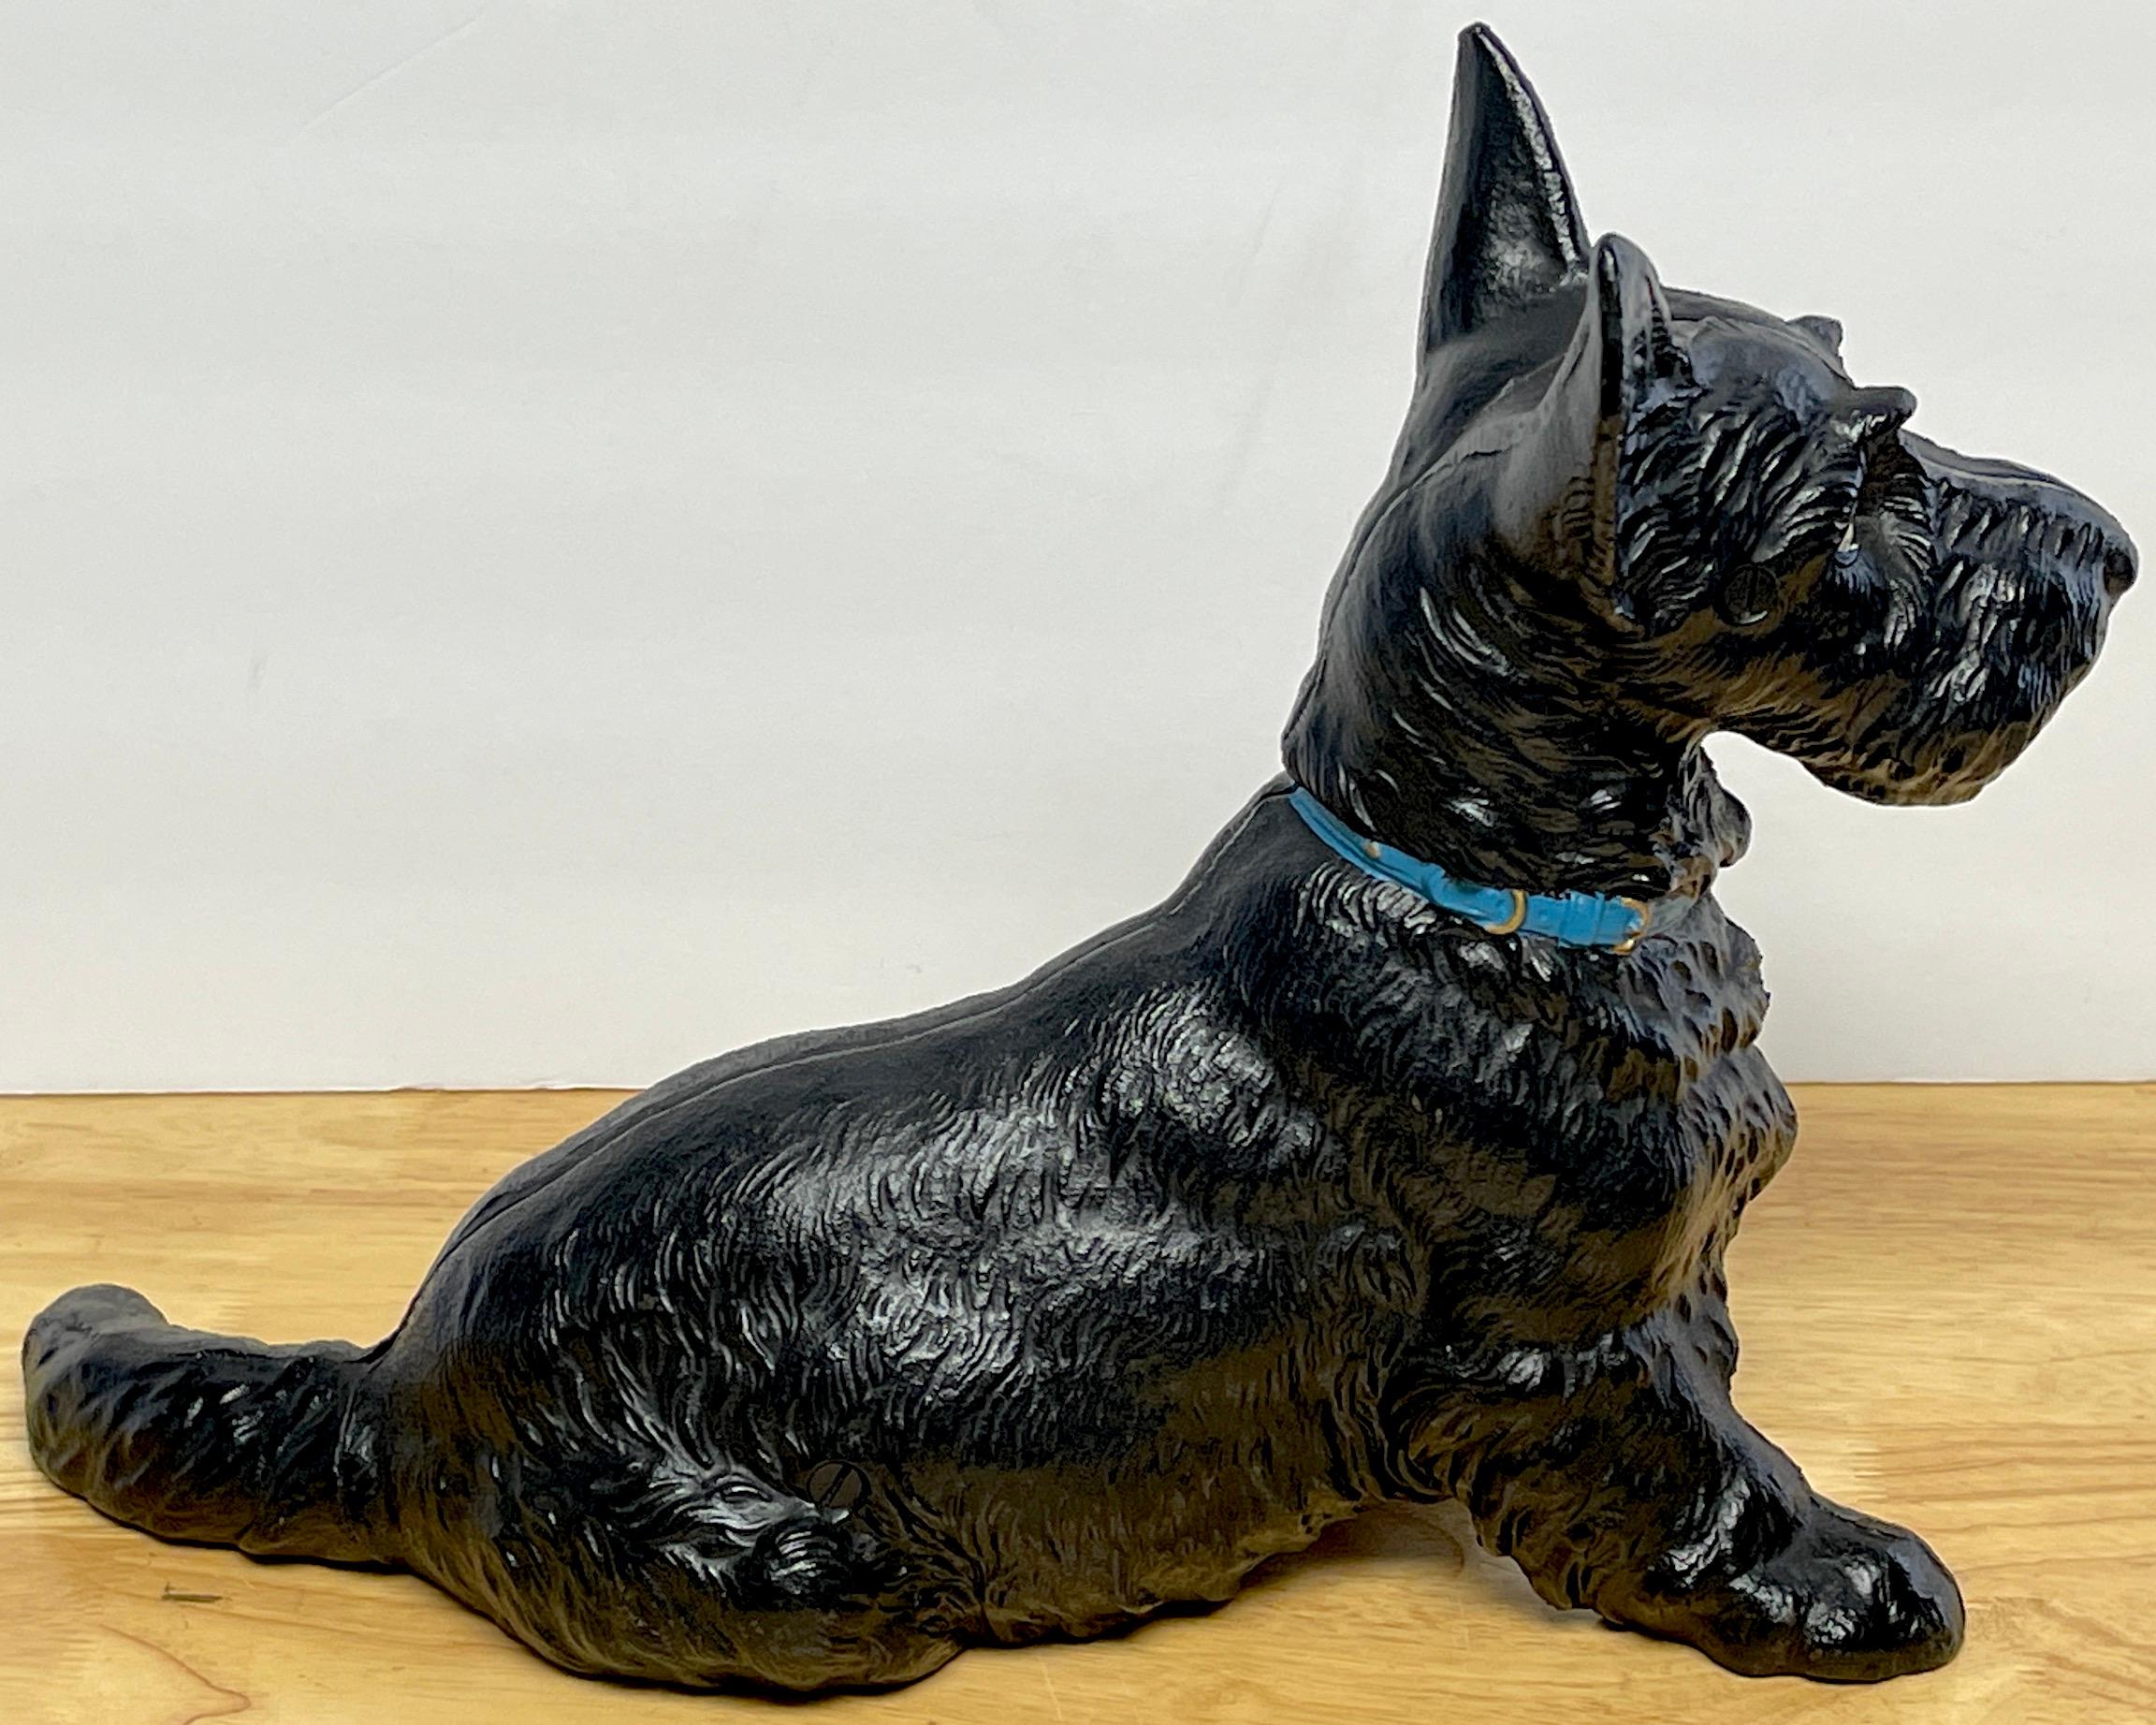 Largest Hubley Seated Scotty with Collar Doorstop, A pristine example of the largest model of the seated Scotty dog doorstop Hubley made. Complete with blue collar, this model is a beauty from every angle. Original paint. 
 